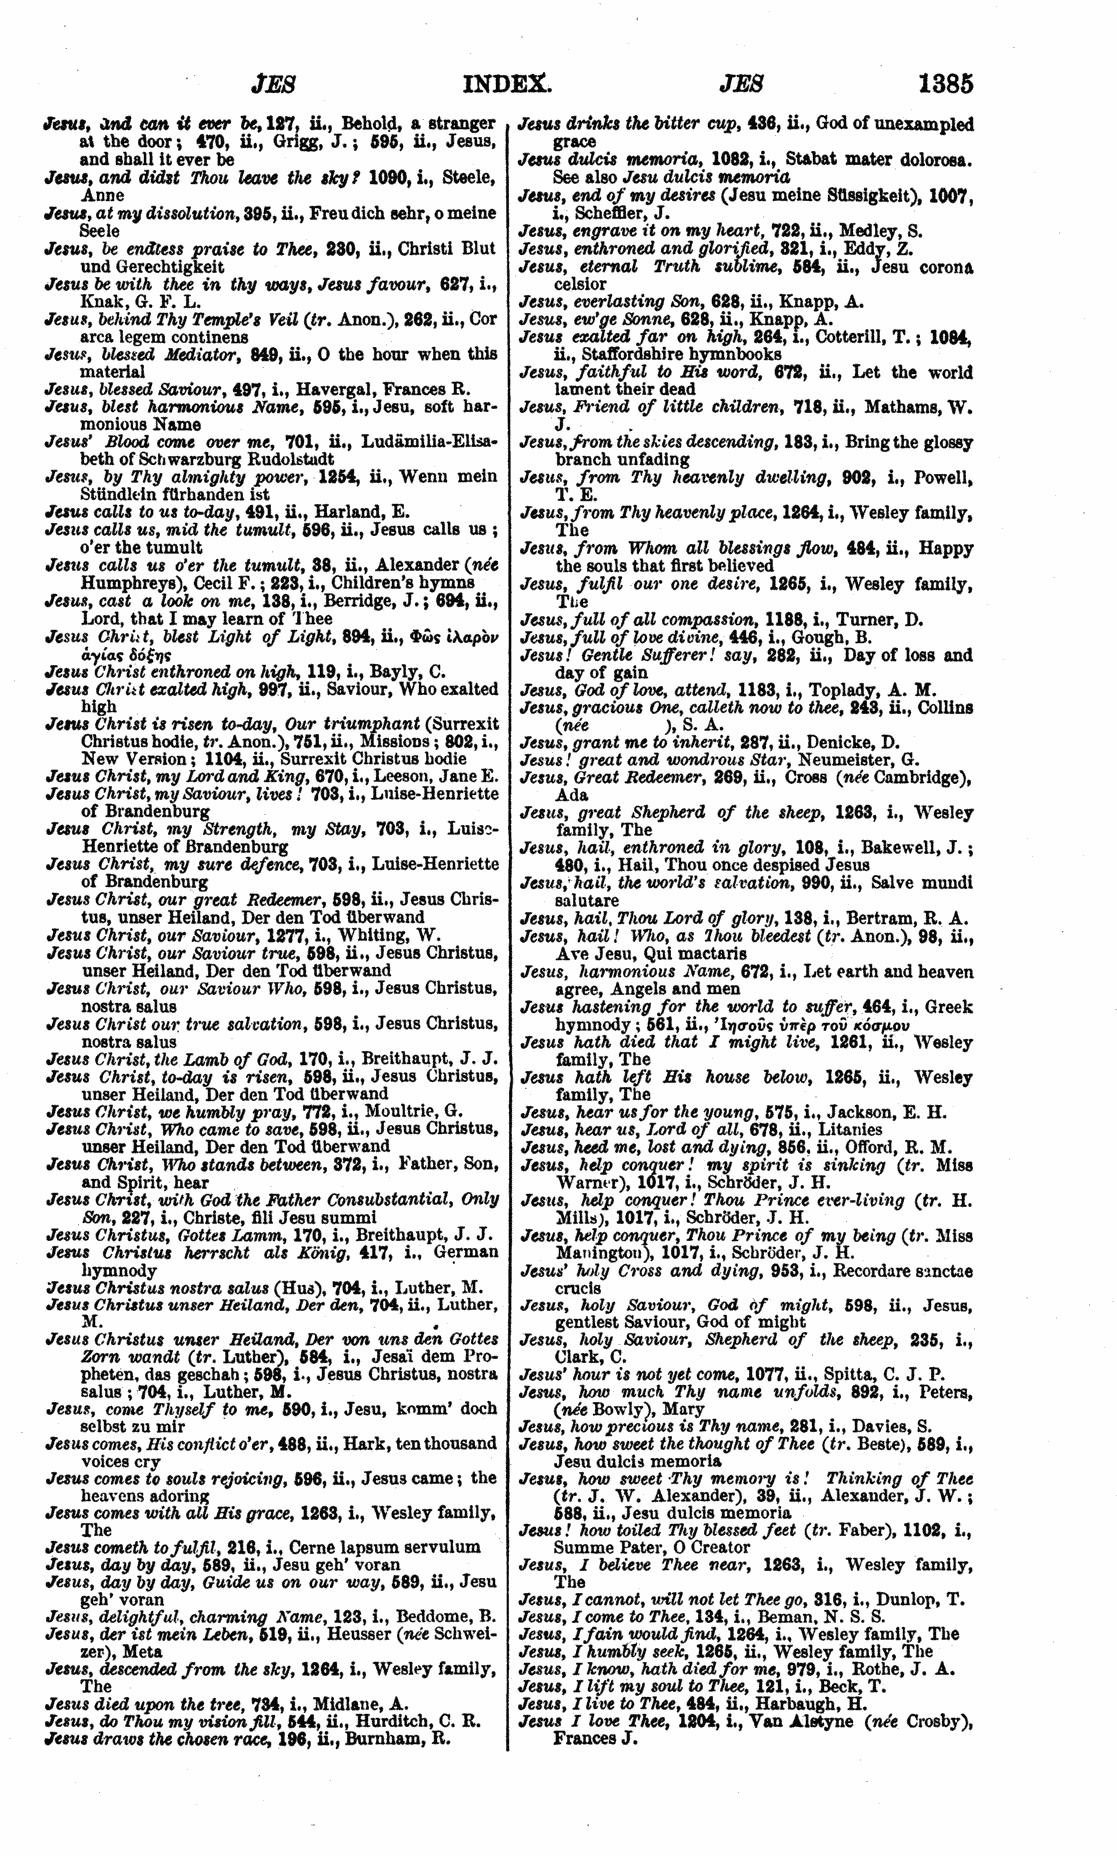 Image of page 1385